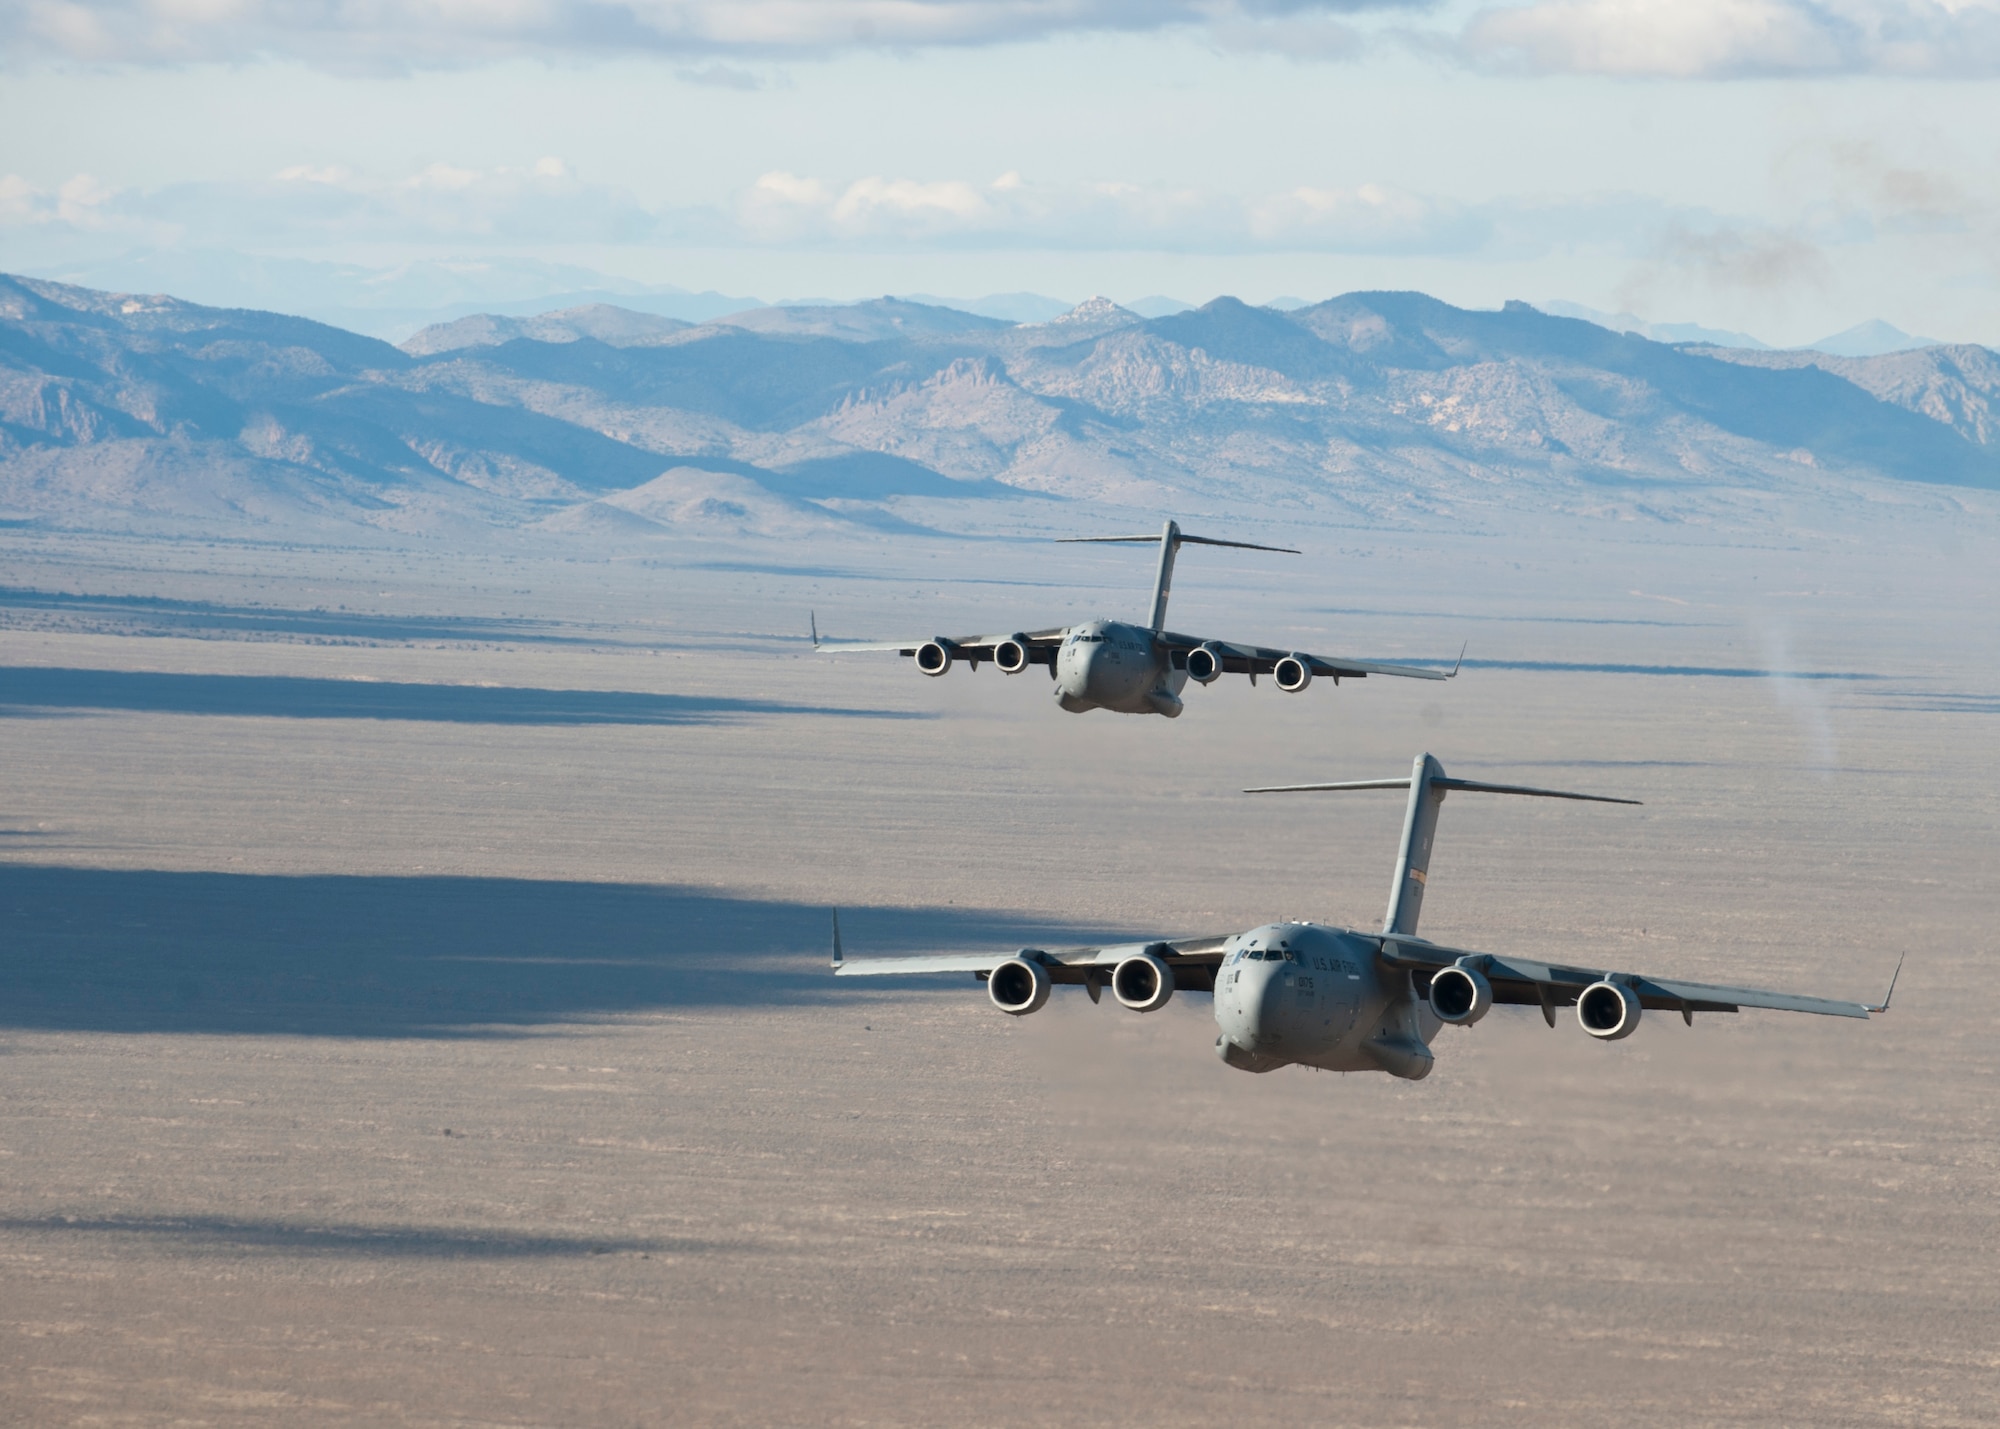 Two U.S. Air Force C-17 Globemaster IIIs fly in formation over the Nevada Test and Training Range to participate in the U.S. Air Force Weapons School's Joint Forcible Entry Exercise 14B Dec. 6, 2014. JFEX, as part of a restructured integration phase in the USAFWS, is a prime example of the advanced training students receive throughout the course that is unmatched anywhere else in the world. (U.S Air Force photo by Senior Airman Thomas Spangler)